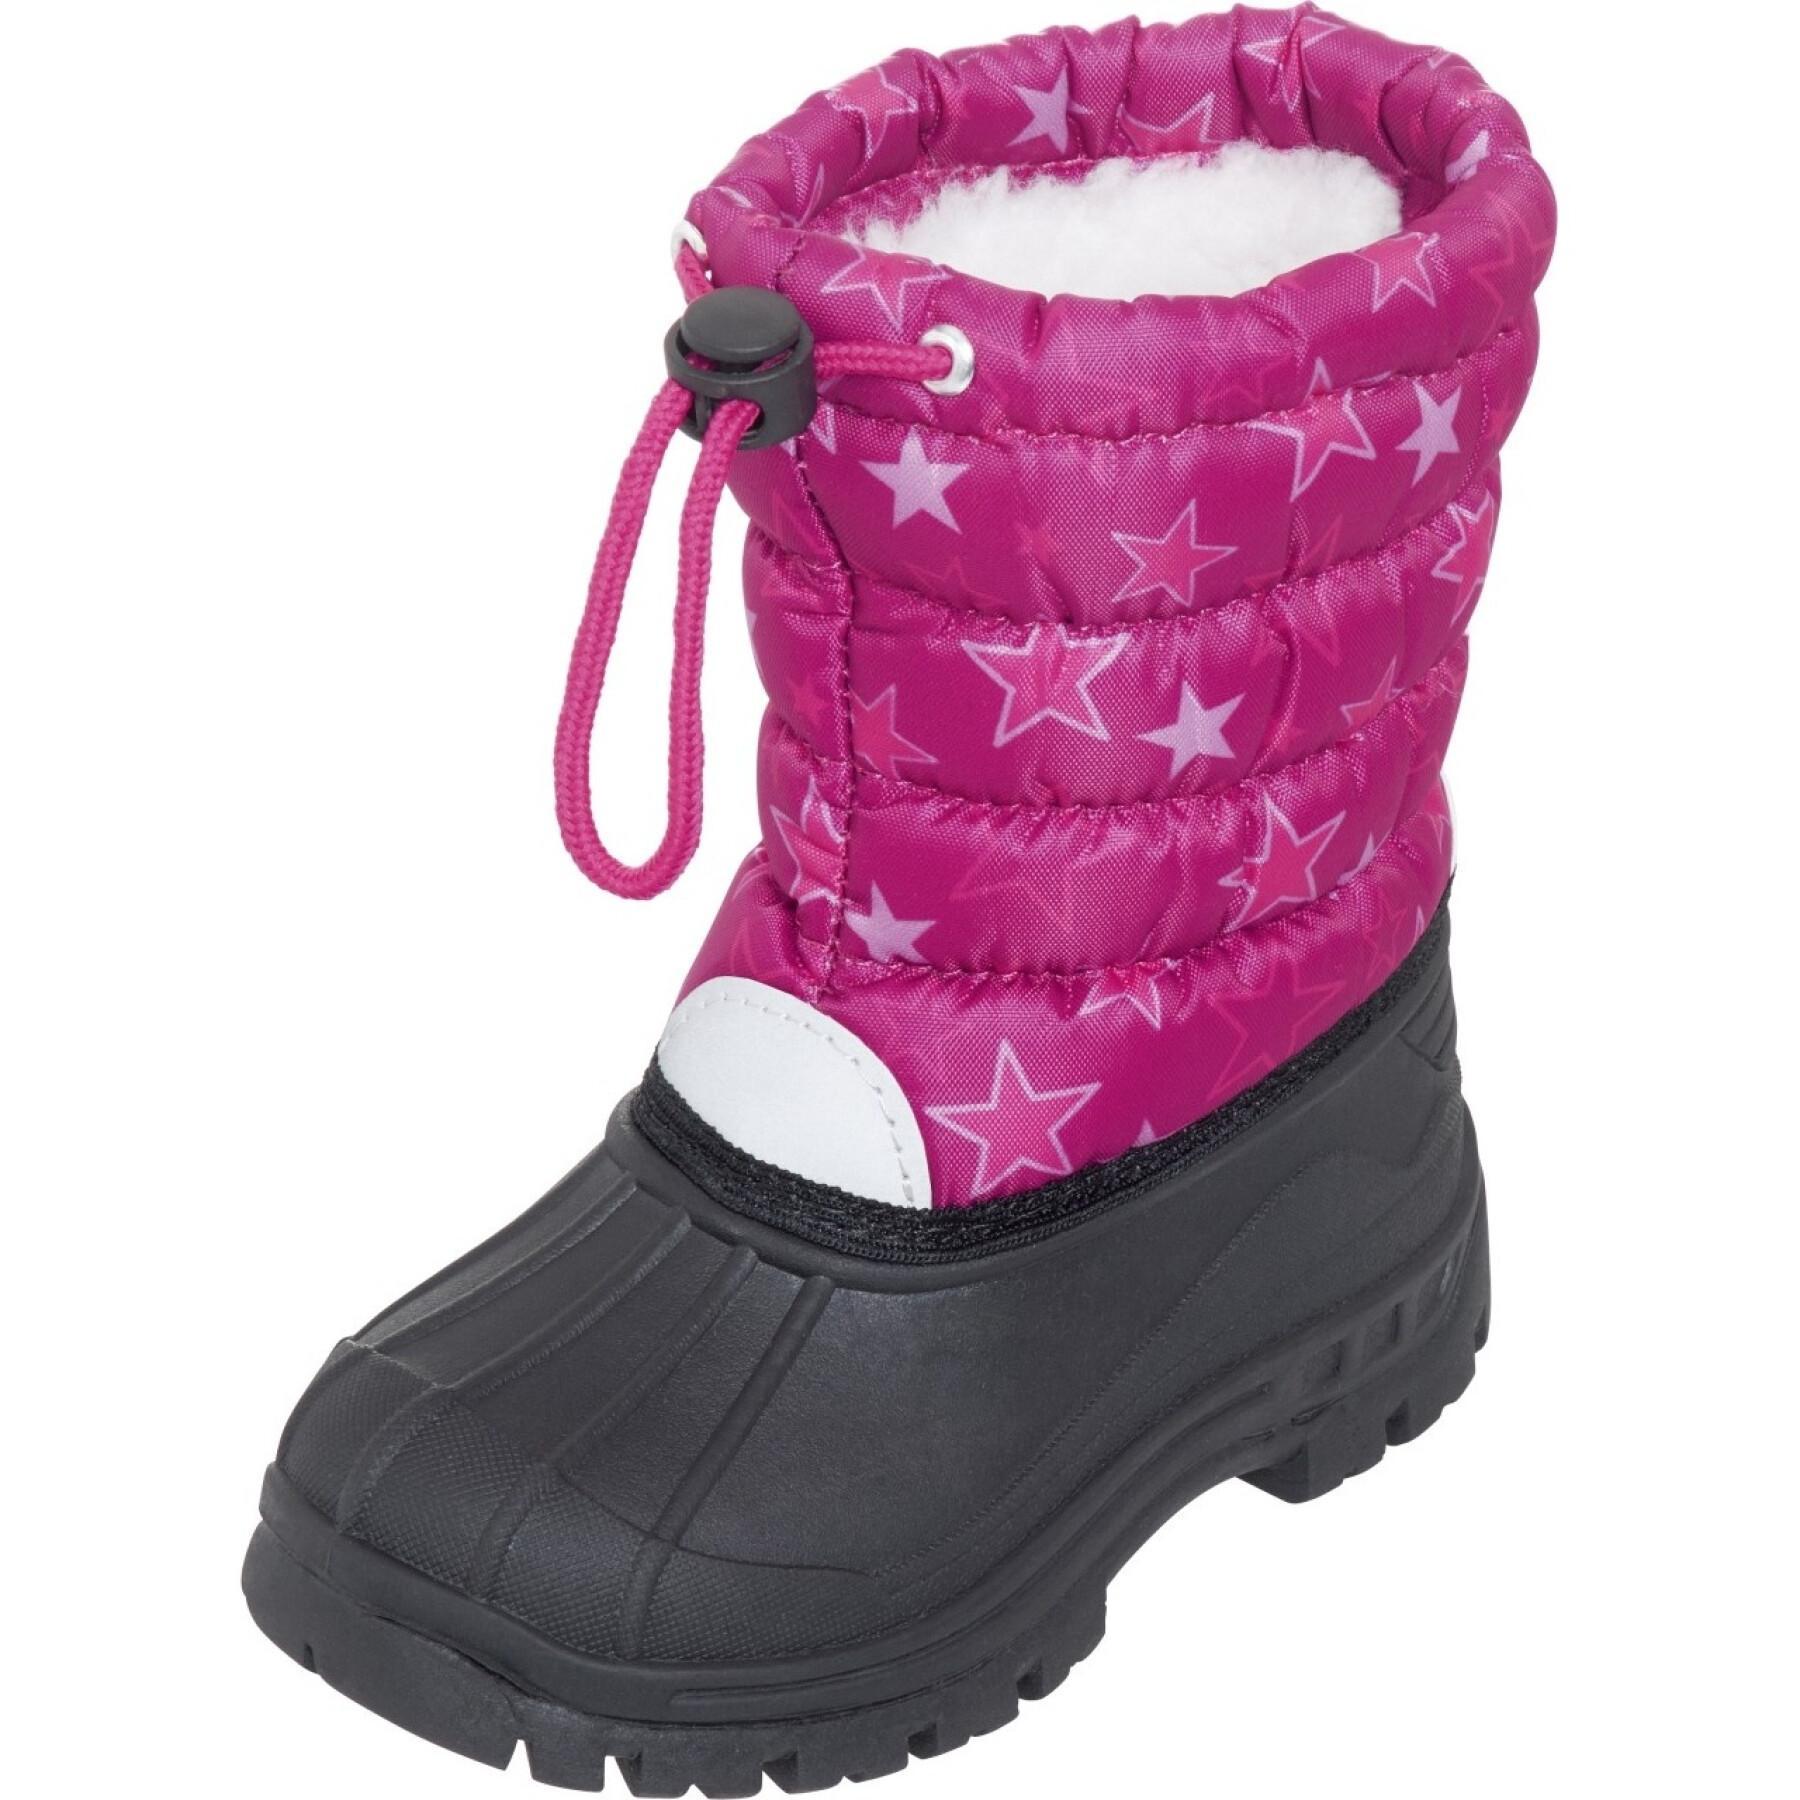 Baby winter boots Playshoes Stars